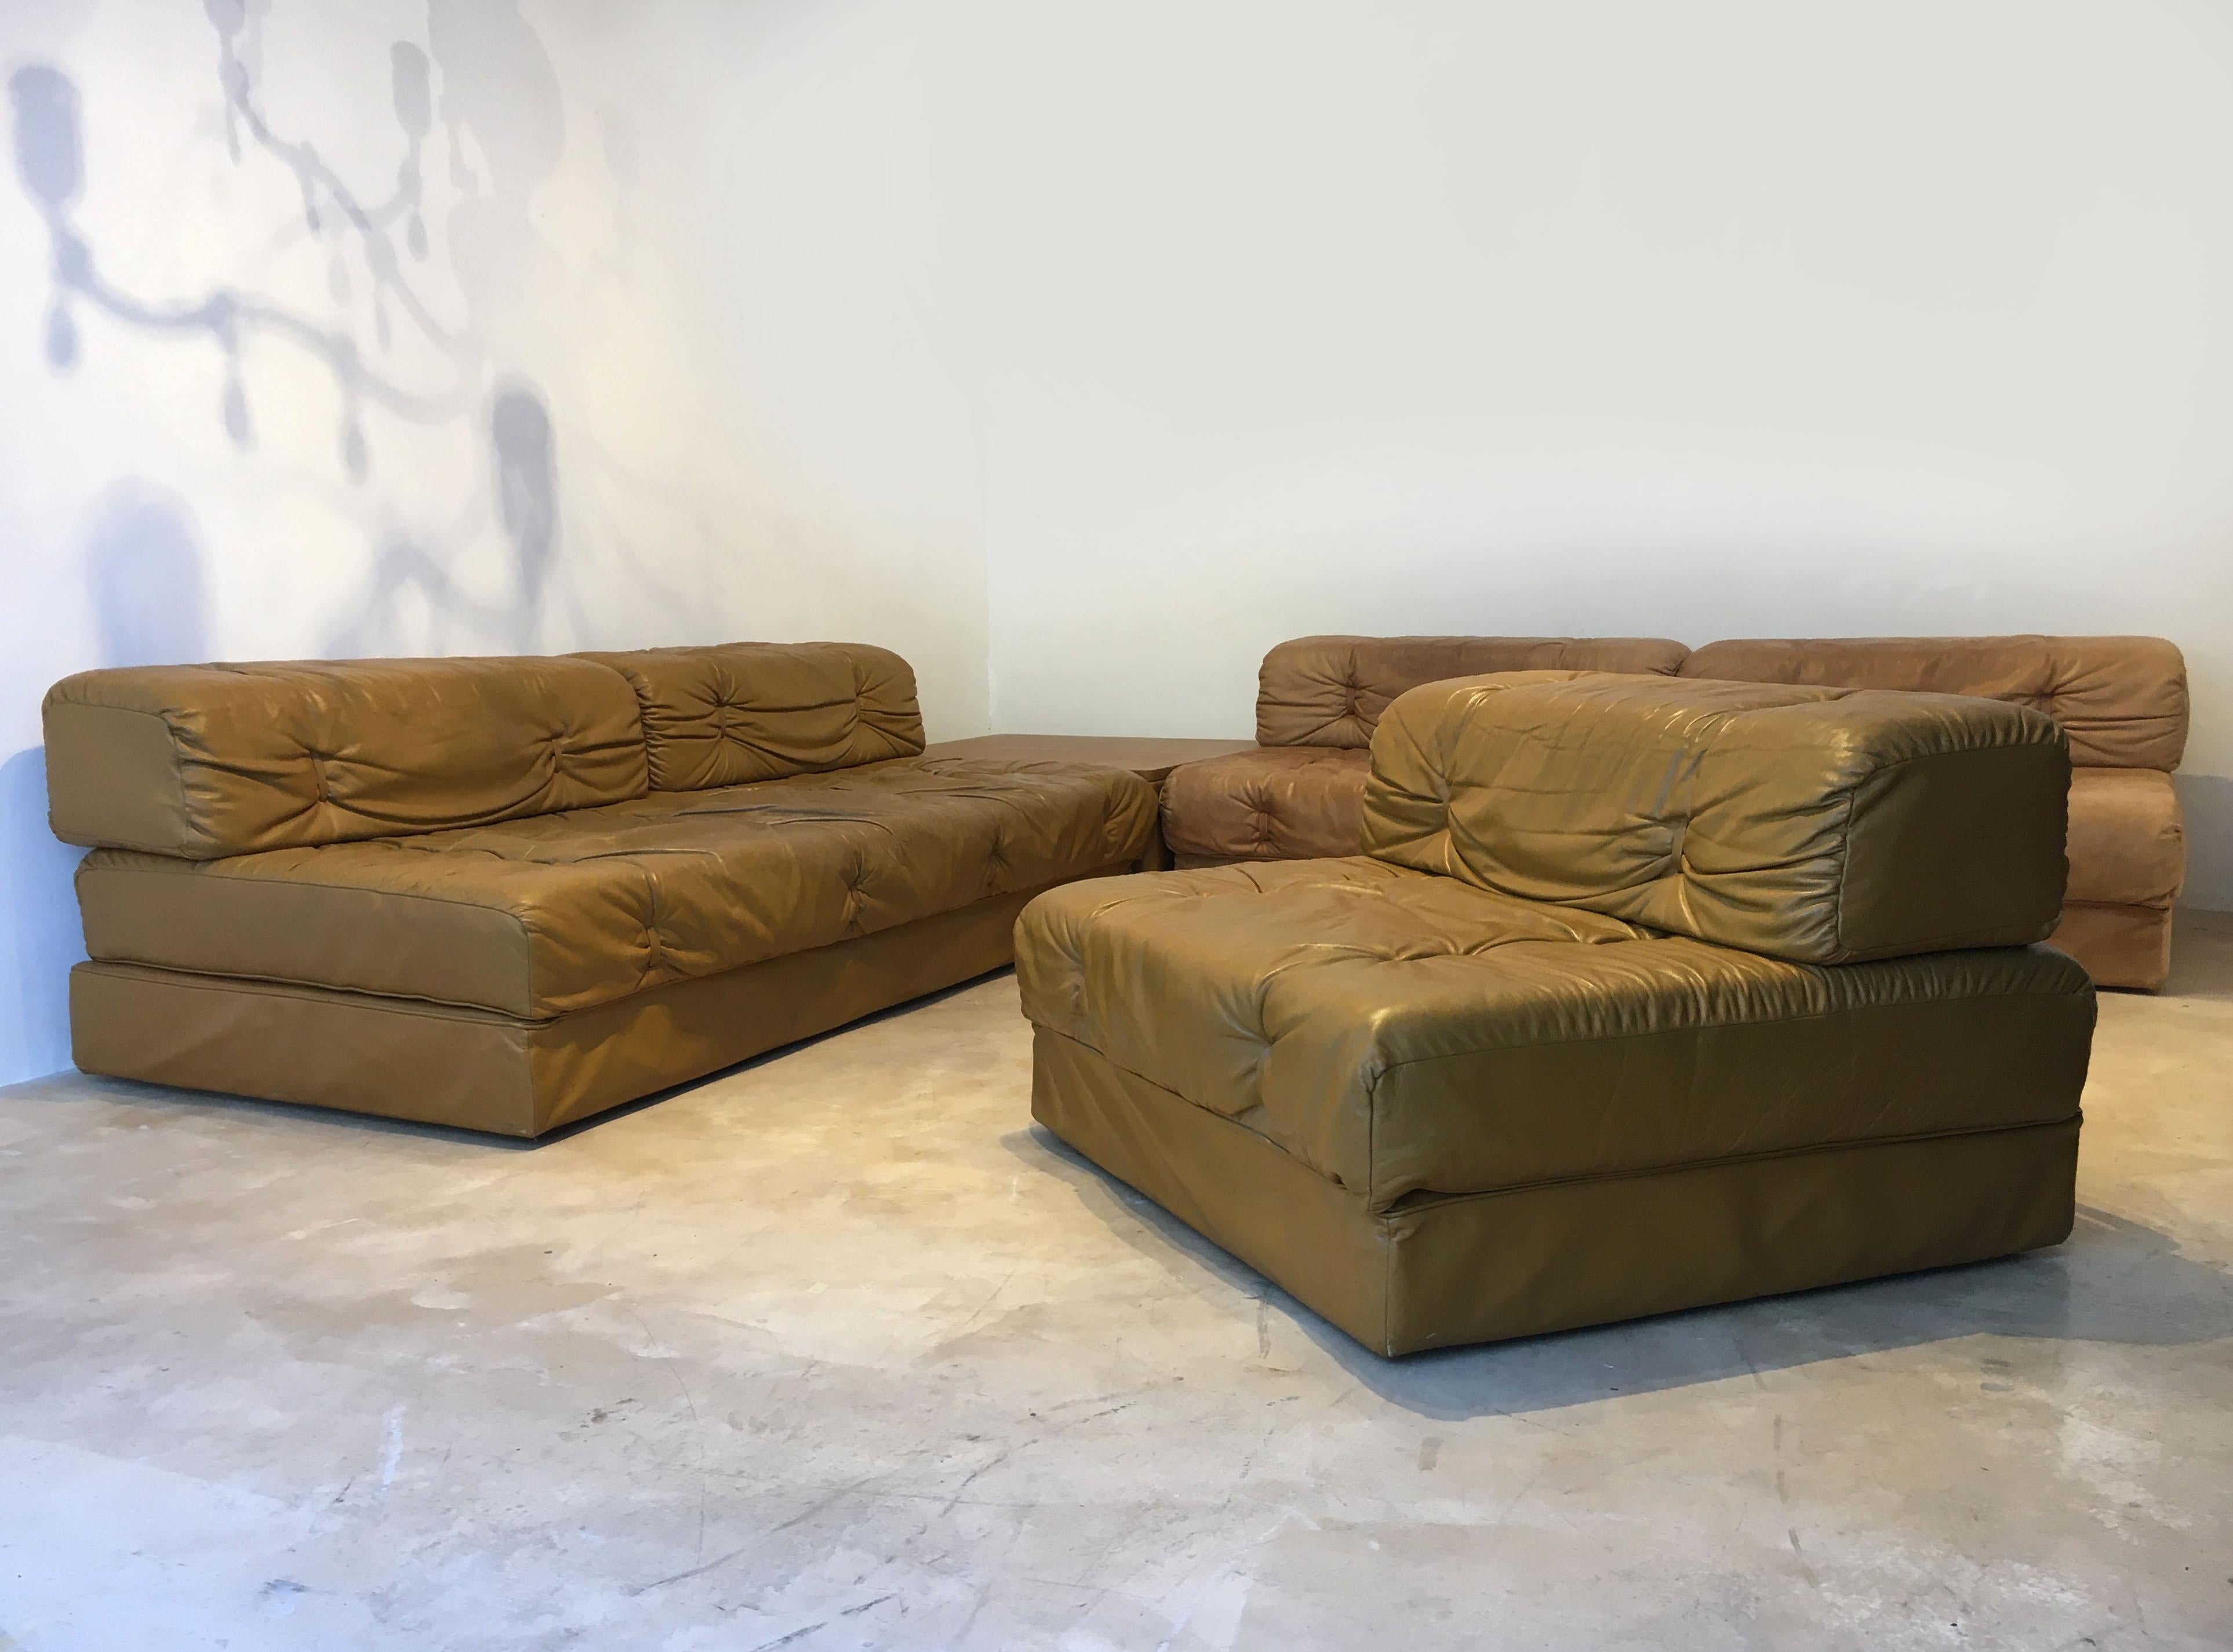 Modular sofa suite daybeds 'Atrium', Wittmann, cognac leather, 1970. A fantastic modern modular sofa in aged and patinated leather designed by Karl Wittmann and manufactured by Wittmann Möbelwerkstätten, Austria, 1970s. The set consists of four